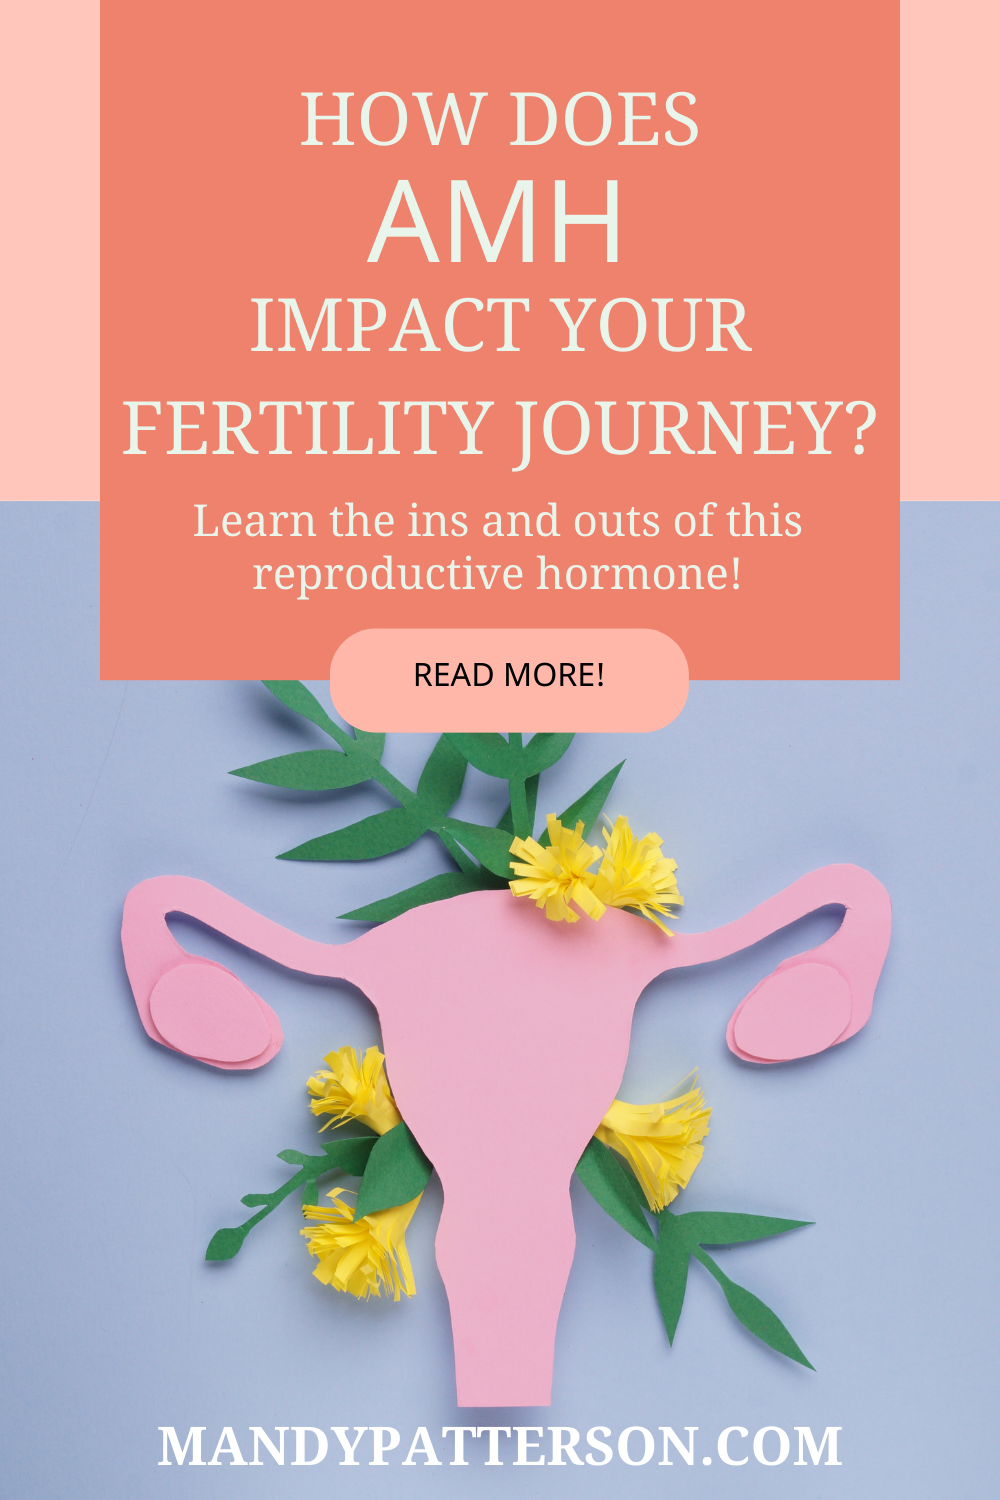 How Does AMH Impact Your Fertility Journey?